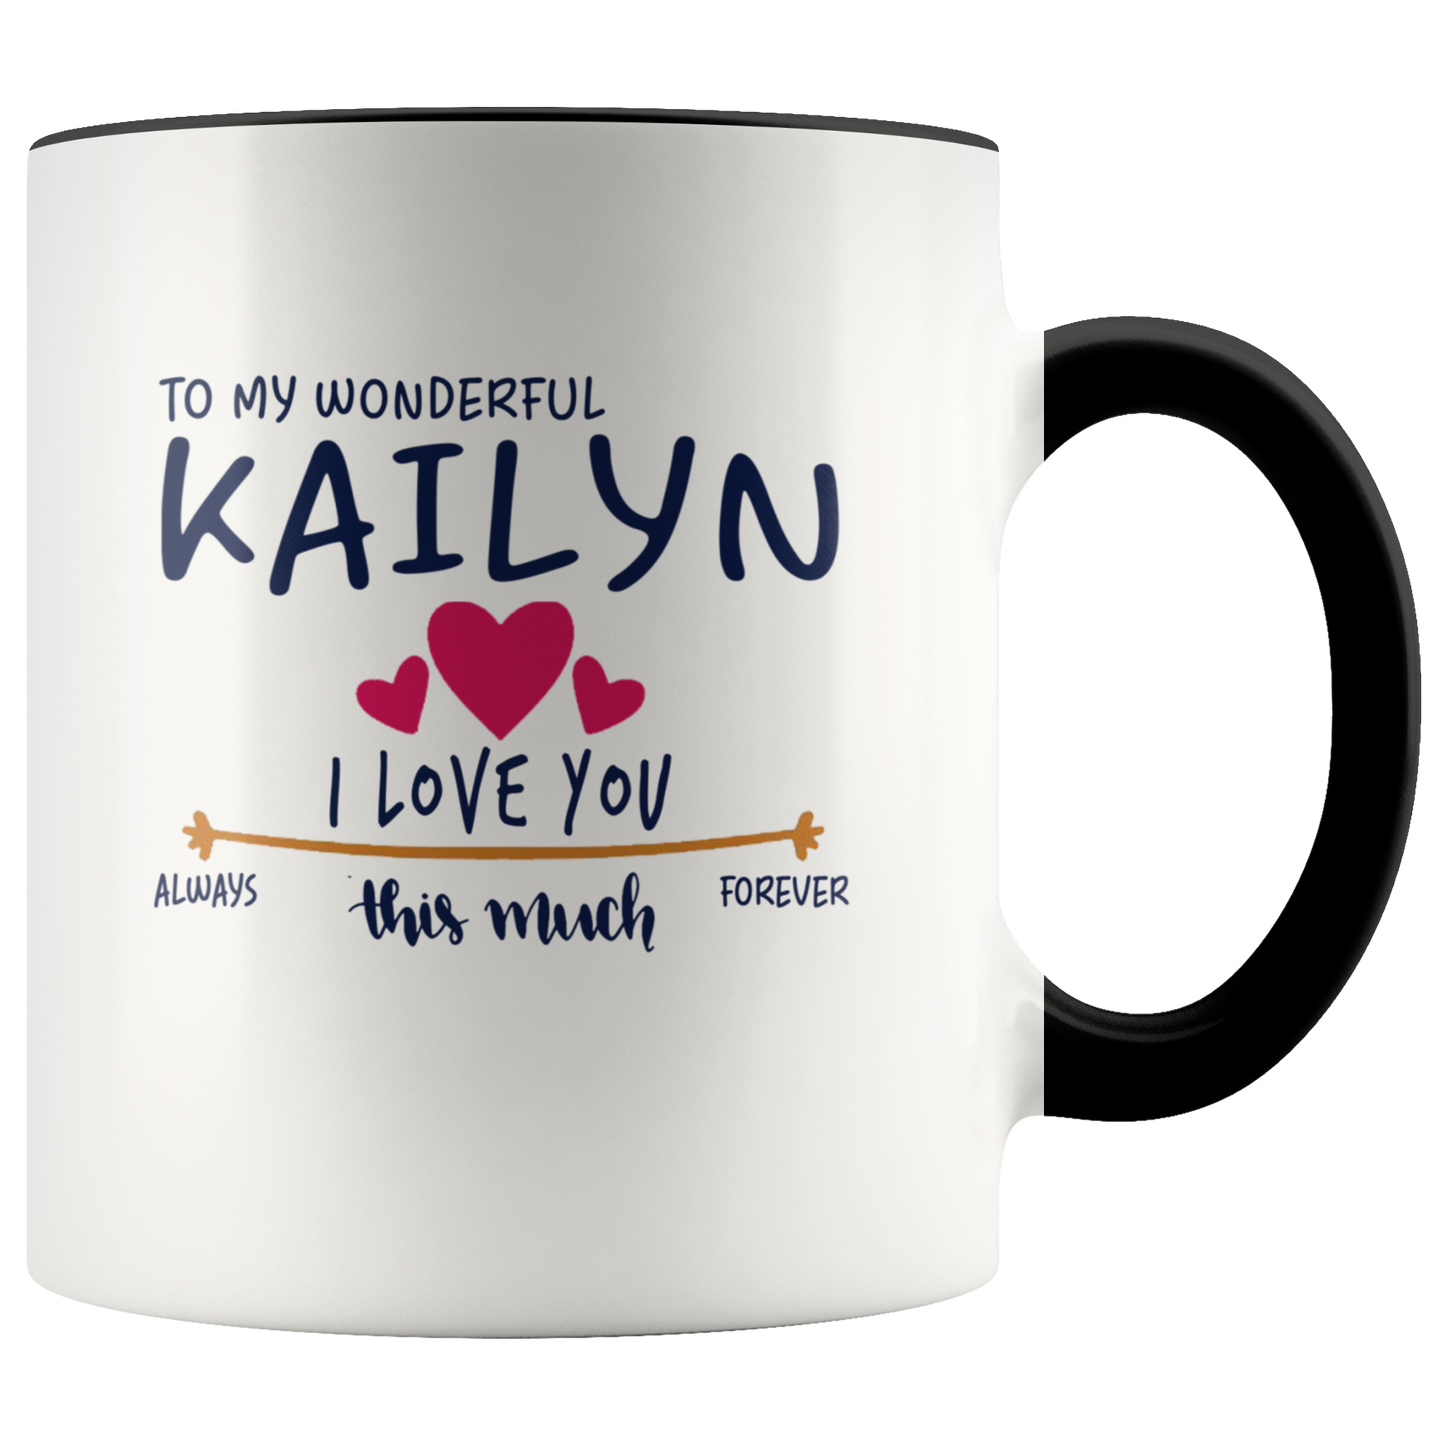 M-21260314-sp-22796 - Valentines Day Coffee Mug With Name Kailyn - To My Wonderful